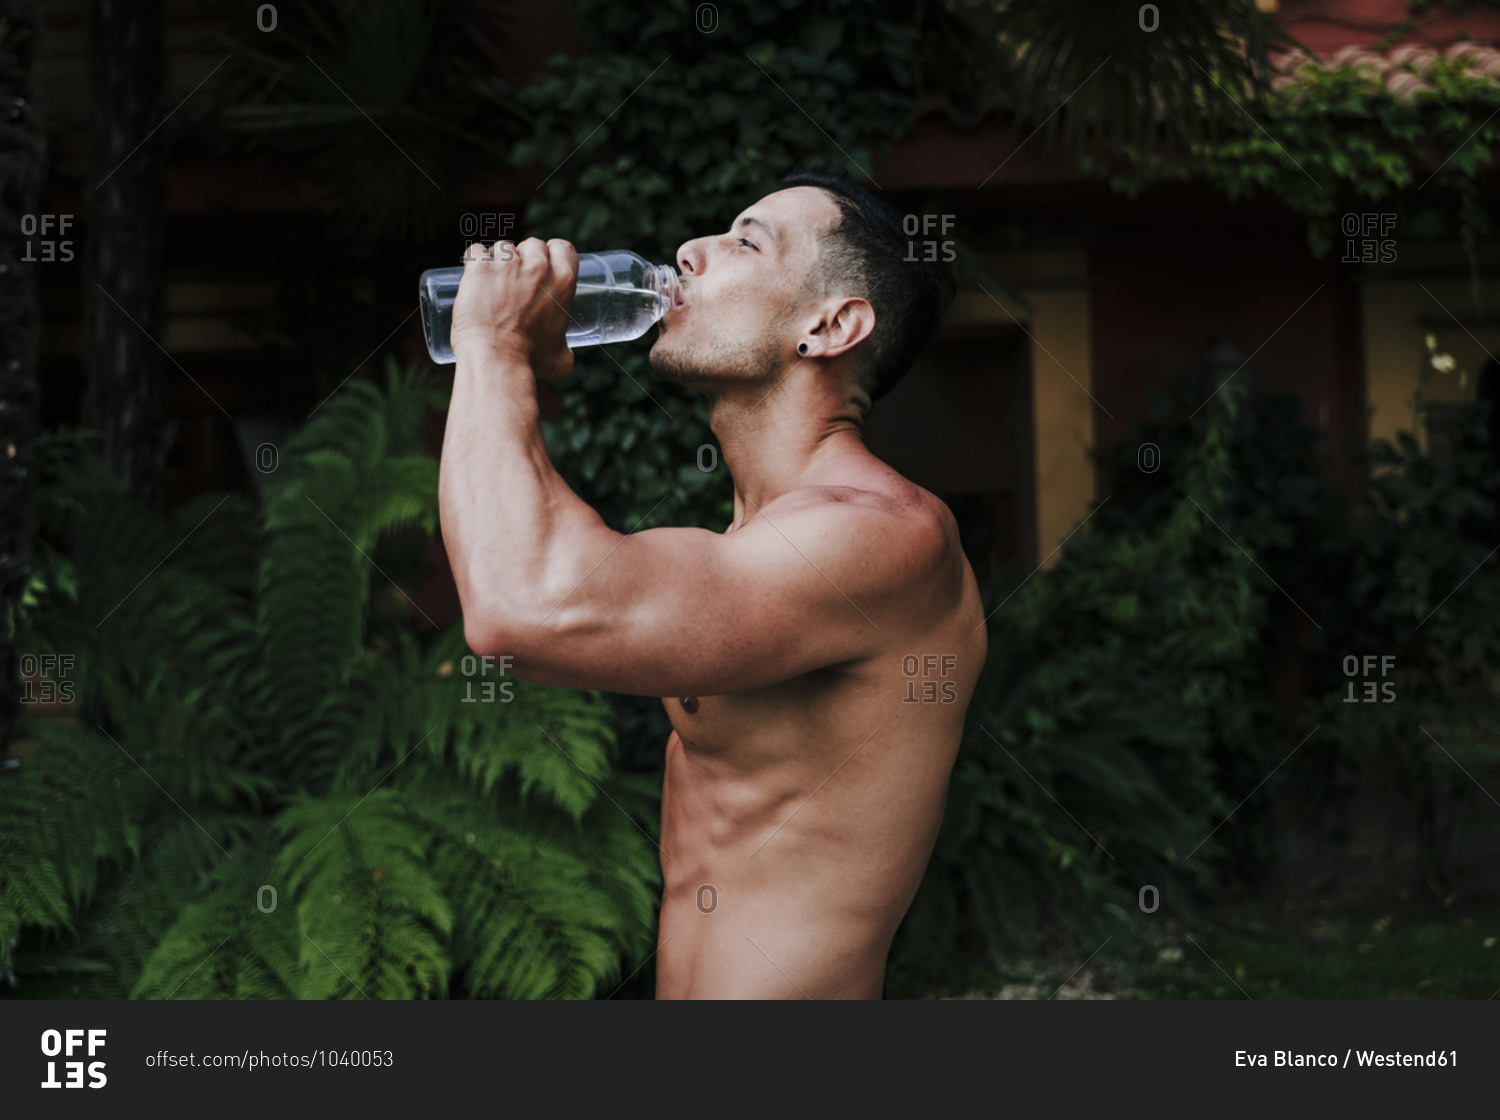 Shirtless male athlete drinking water while standing against plants in yard